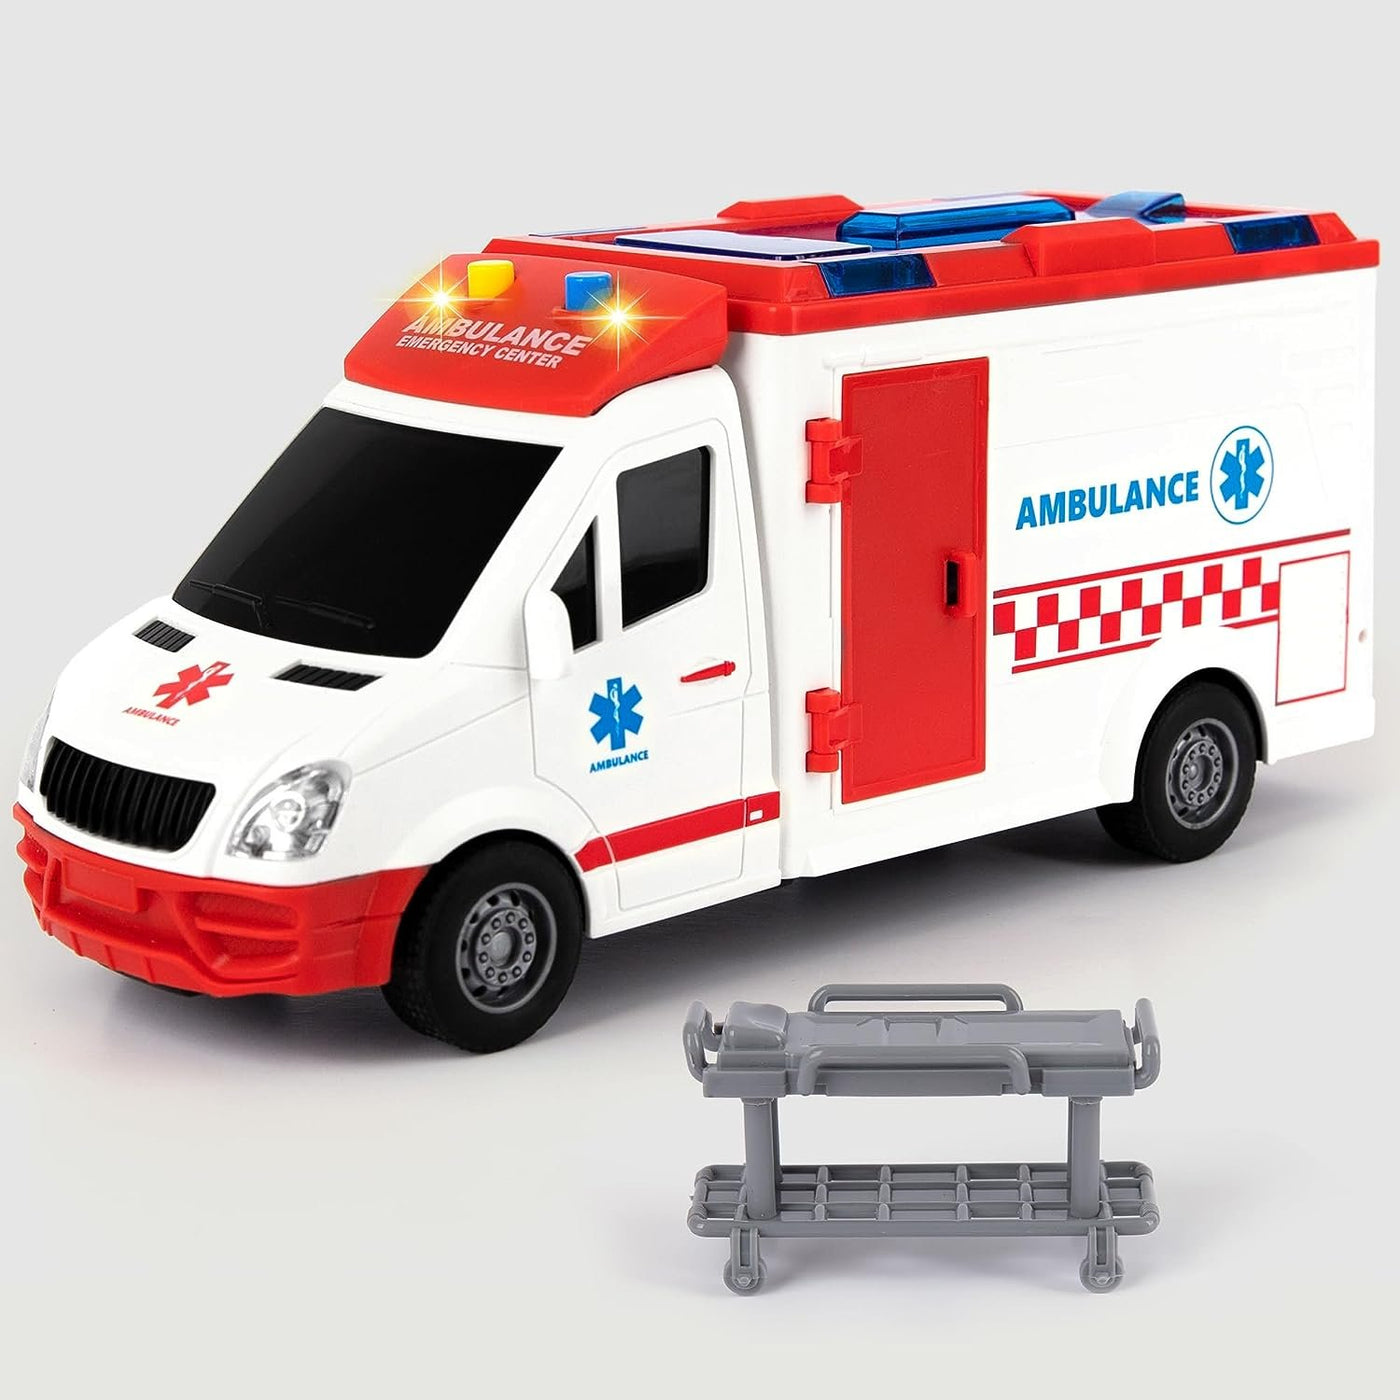 Ambulance Toy Truck for Kids 3,4,5,6,7,8, Lights & Siren, Friction-Powered 1/16 Scale Rescue Toy Ambulance, Emergency Vehicle Toys with Removable Stretcher, Doors Open for Immersive Imagination